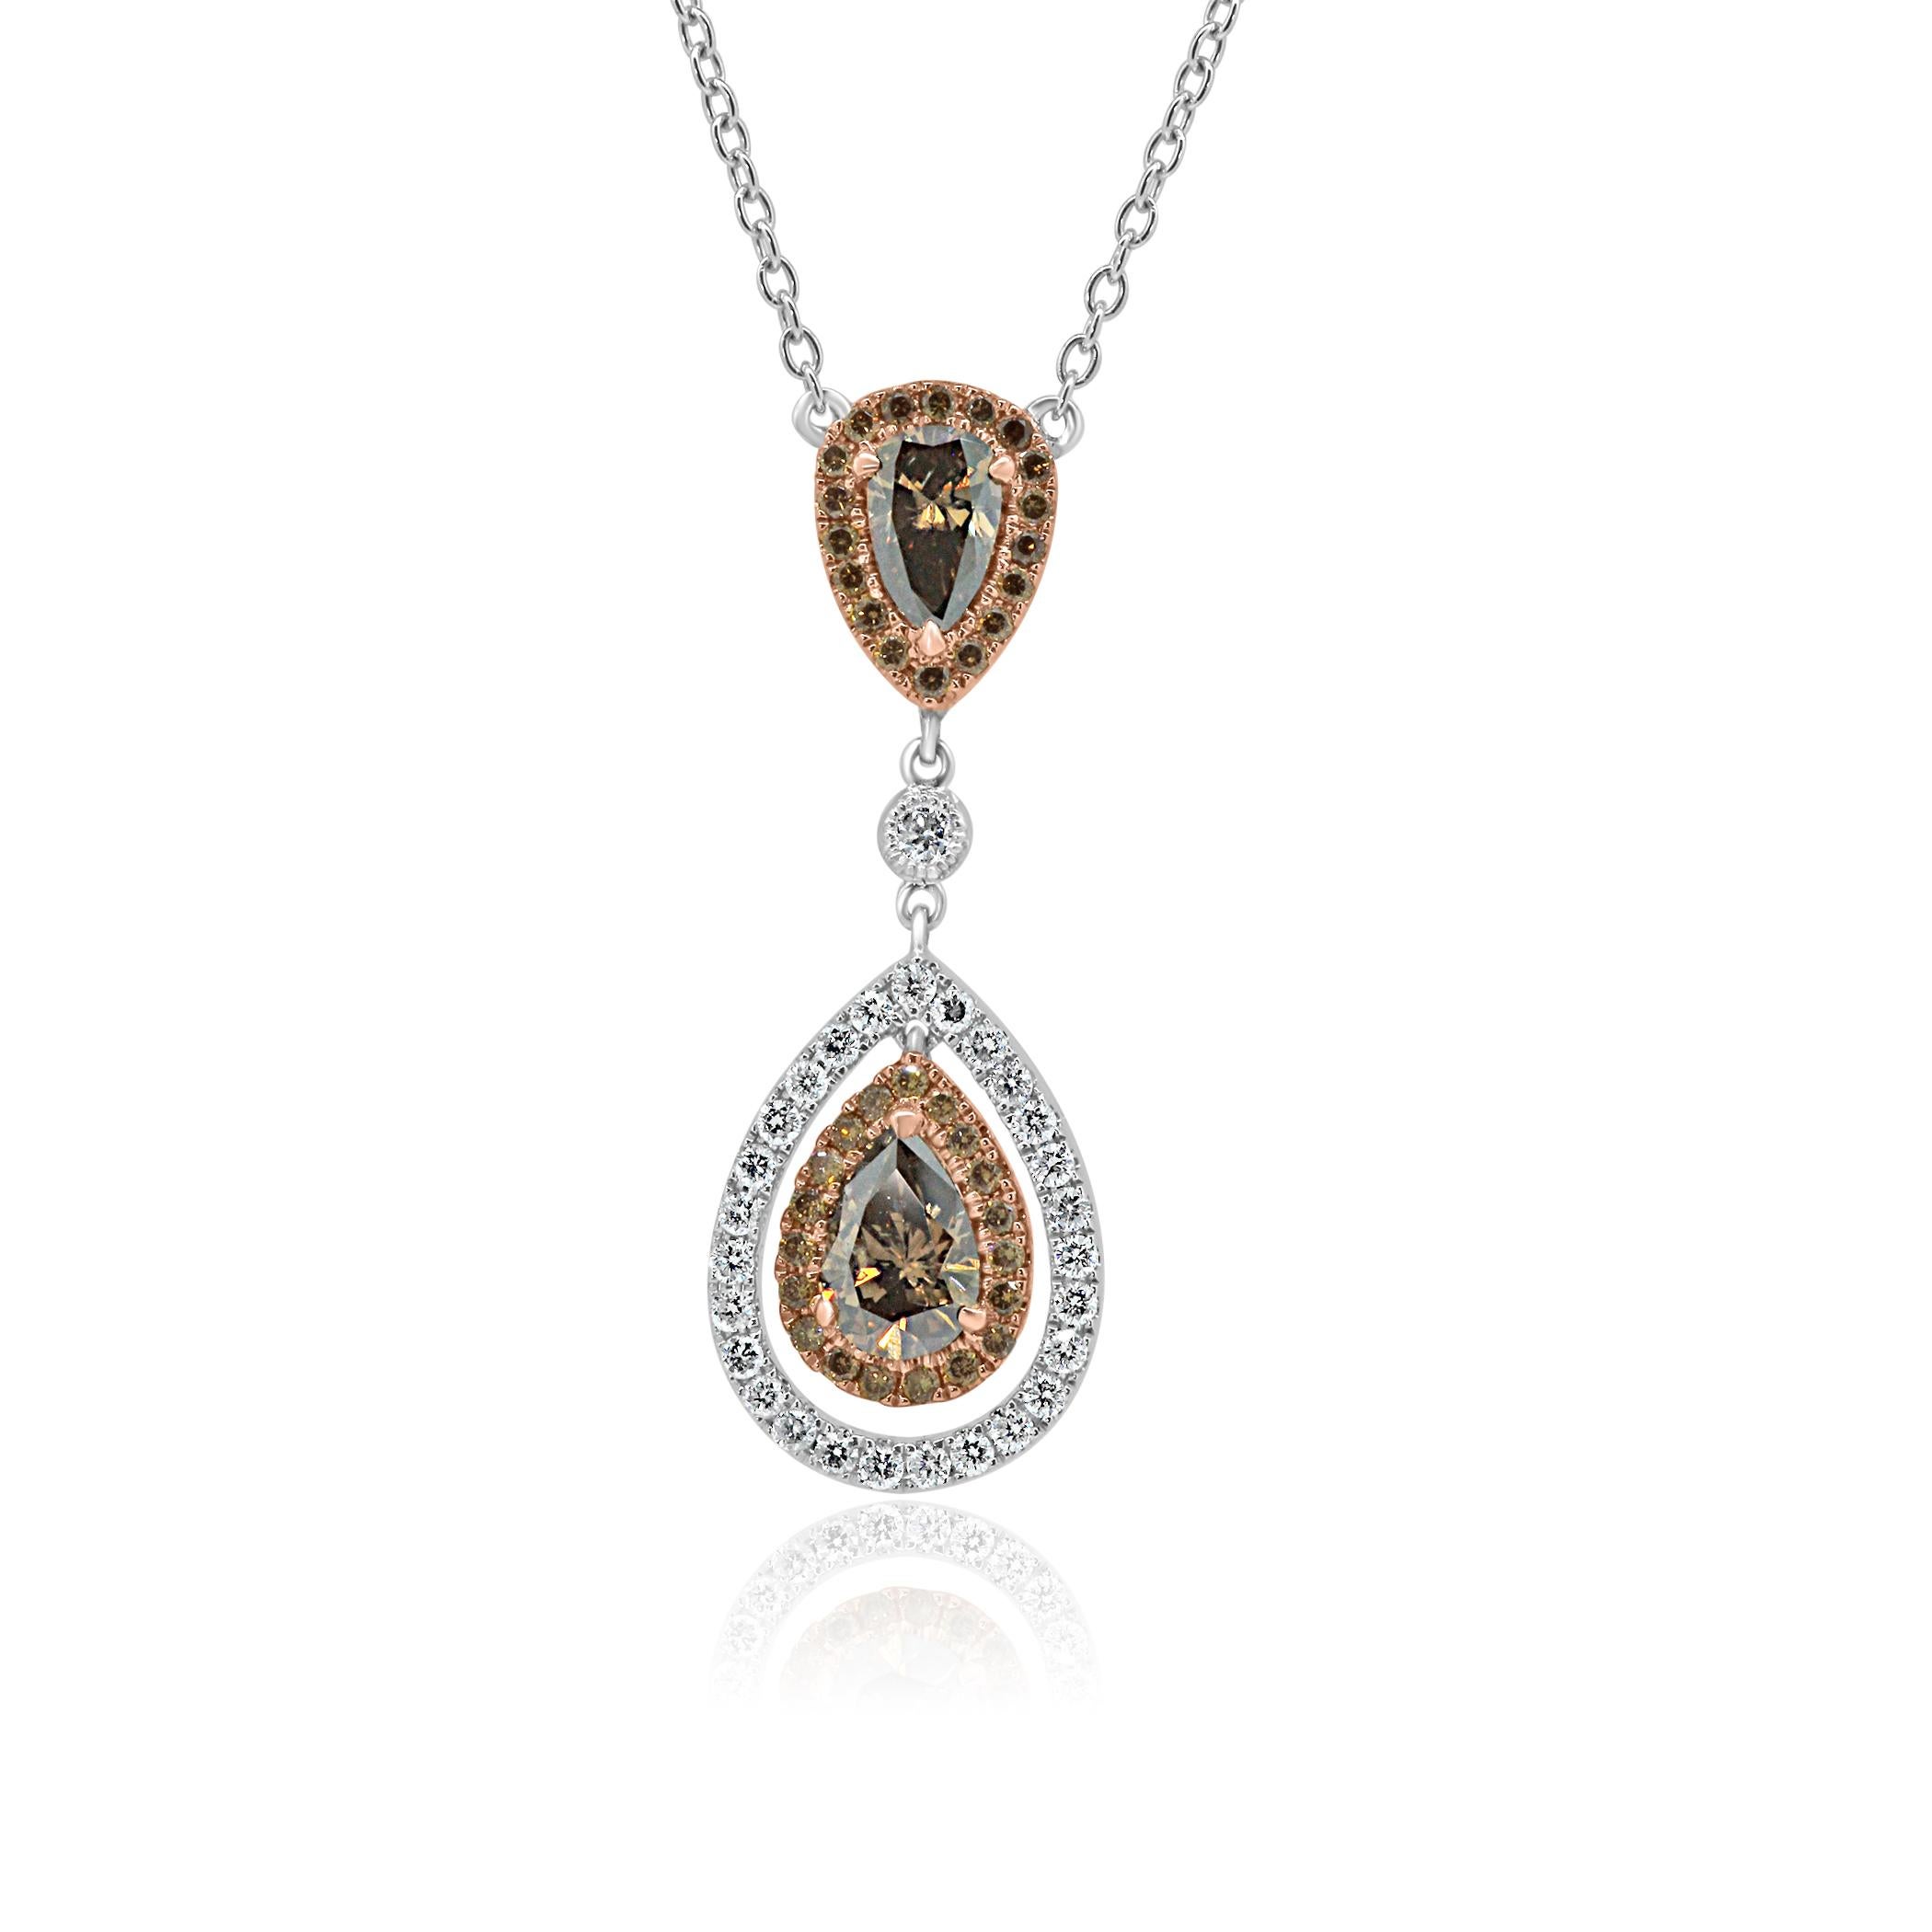 Stunning 2 Cognac Diamond Pear SI Clarity 1.30 Carat encircled in a Double Halo of Champagne Diamond Round Brilliant SI Clarity 0.70 Carat and White G-H Color VS-SI clarity Diamond Round Brilliant 0.45 Carat in Gorgeous 18K White and Rose gold Drop